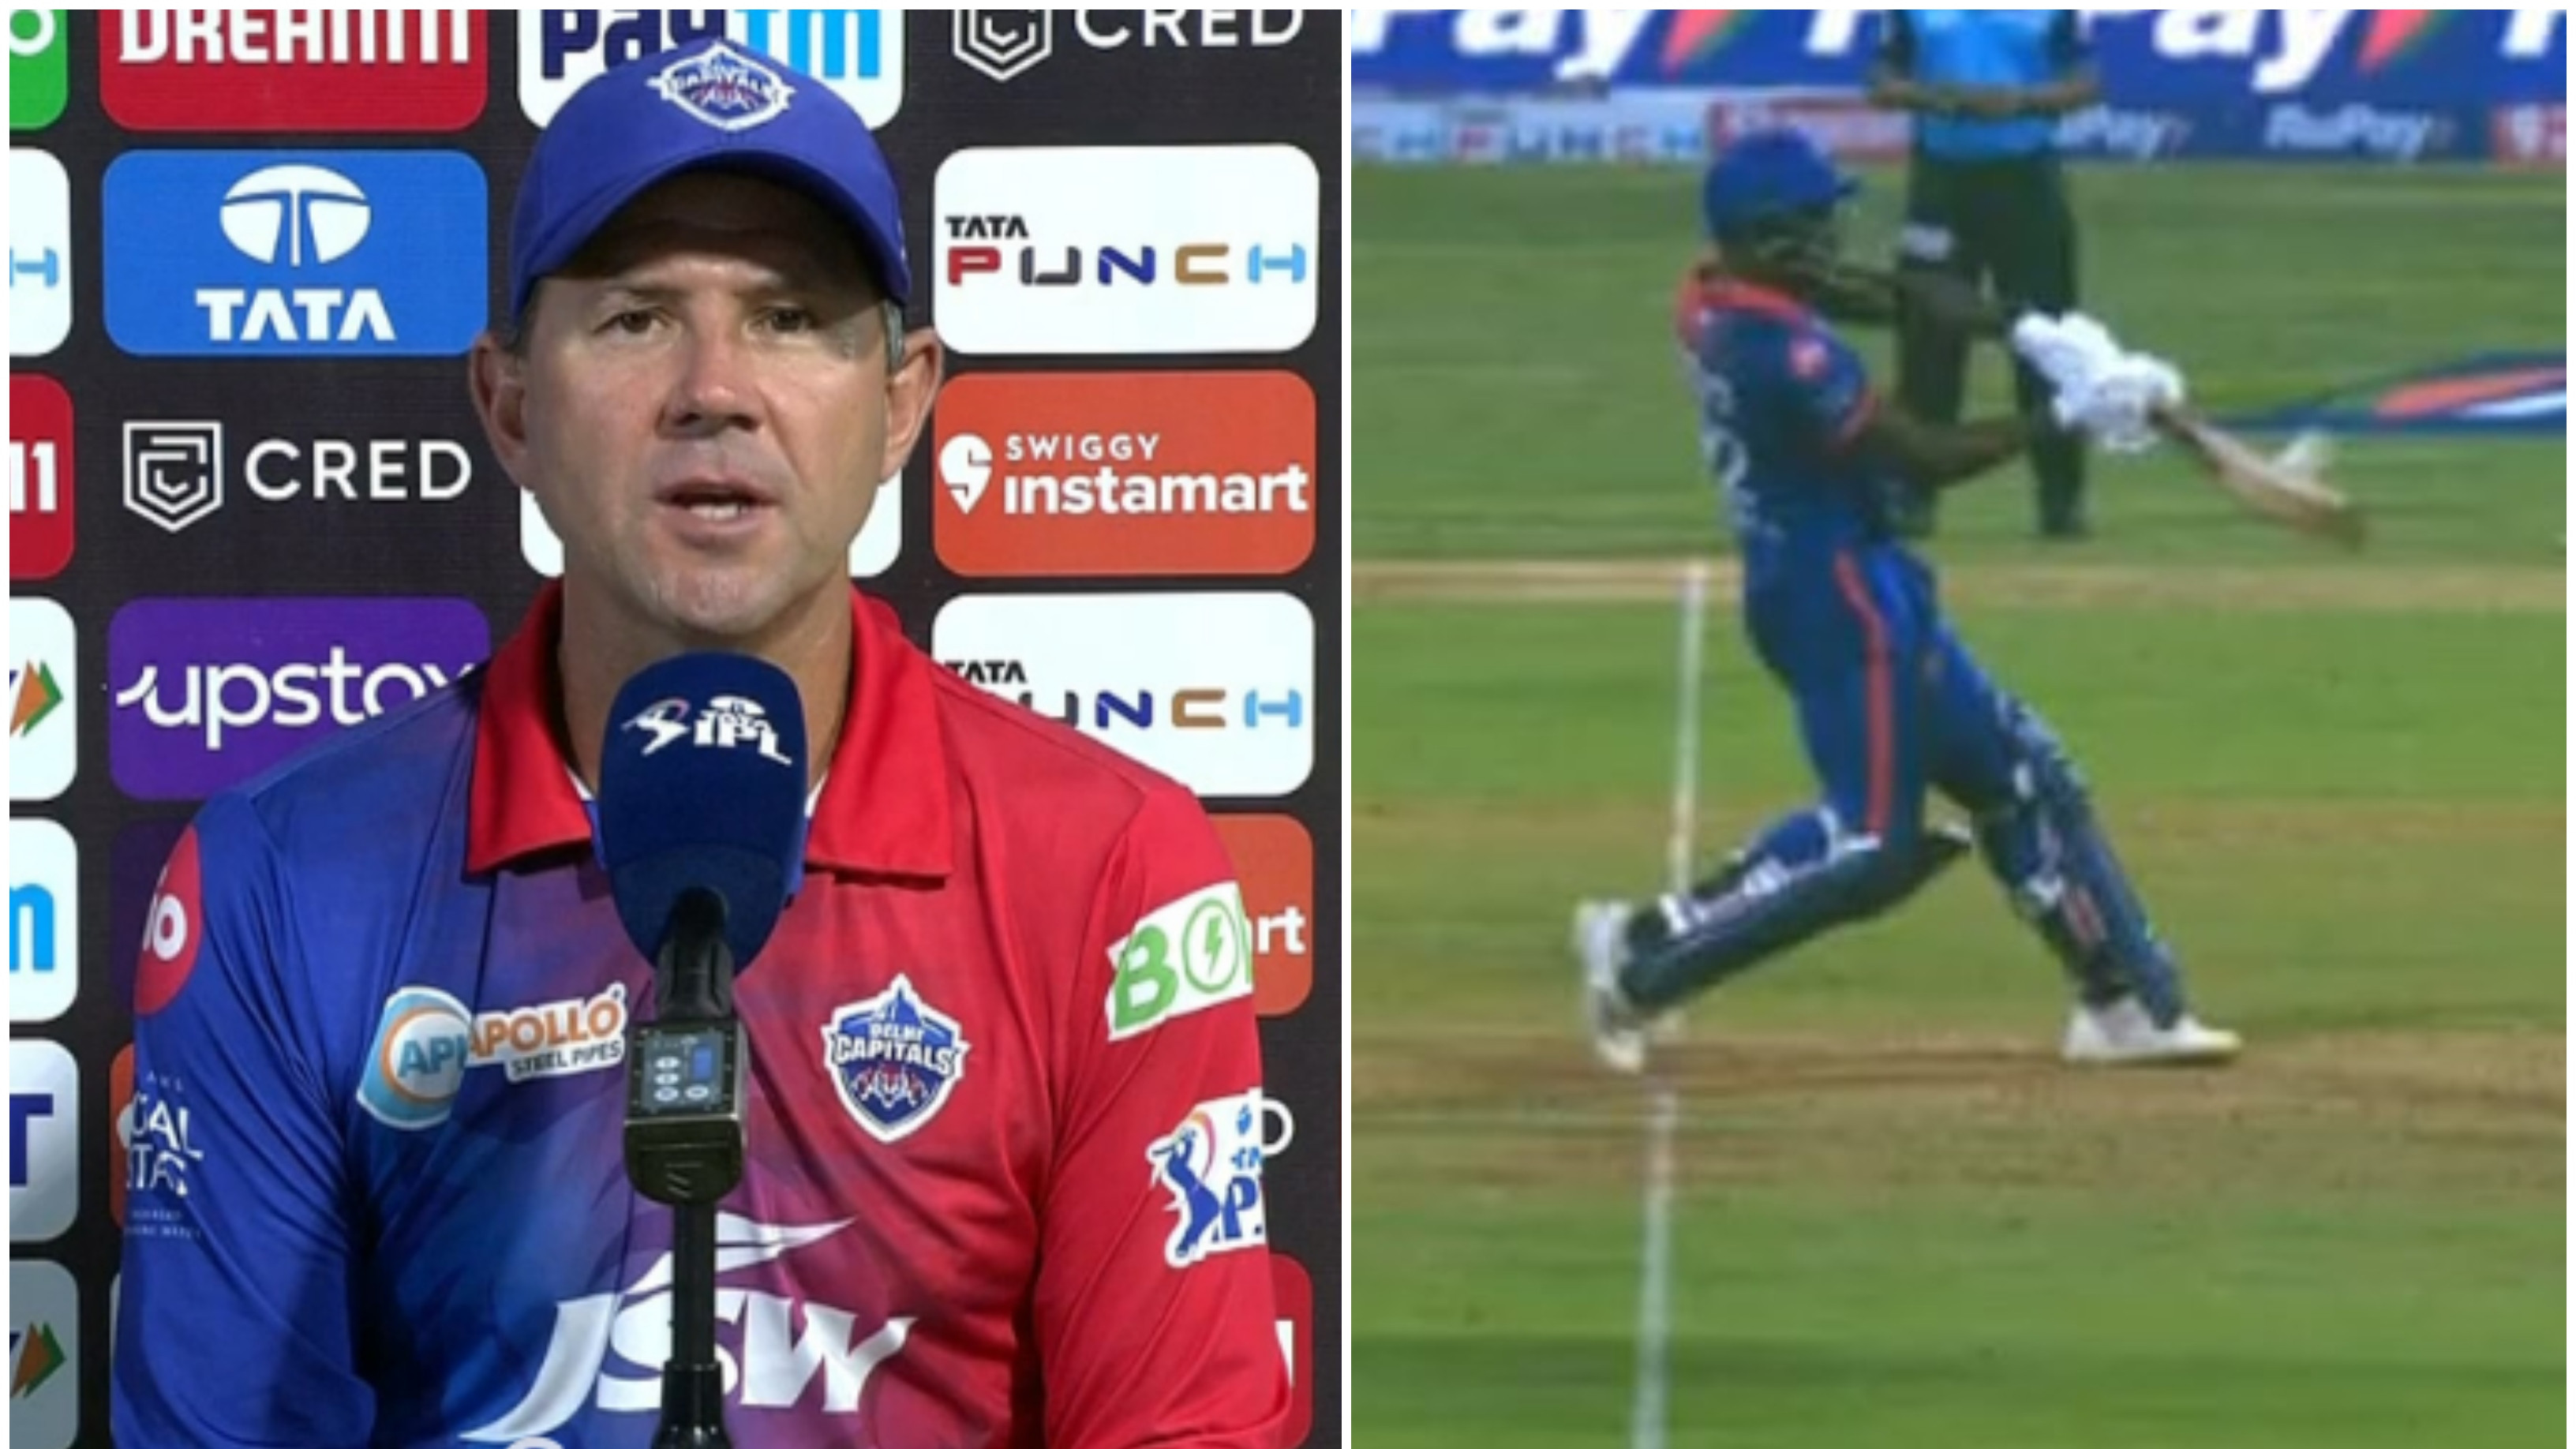 IPL 2022: ‘It was frustrating’, Ponting says he broke 3-4 remote controls in DC’s last game against RR